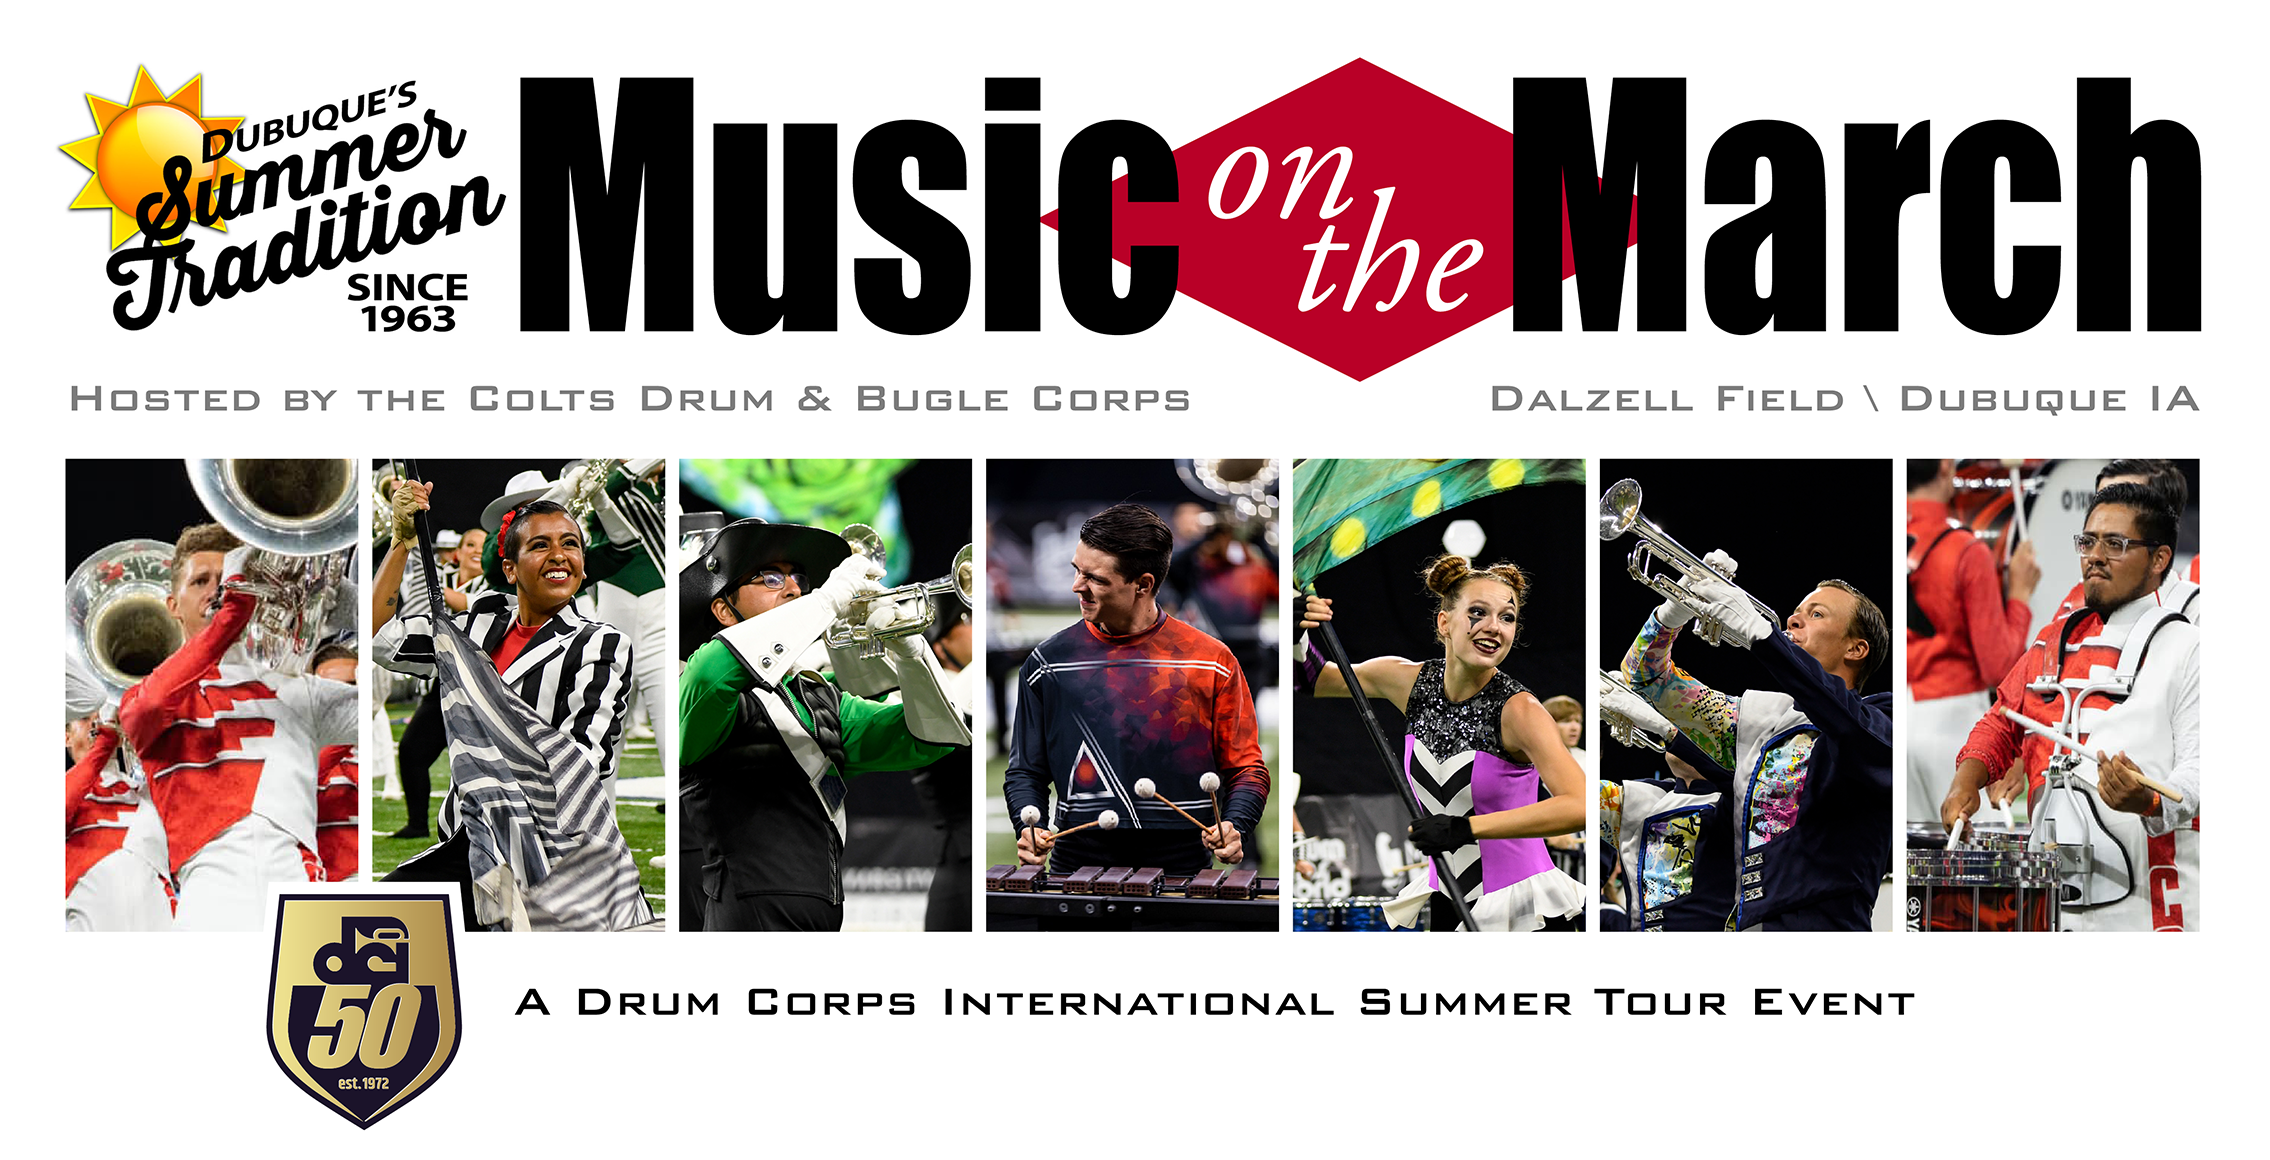 Music On The March, Dubuque's summer tradition since 1963. Hosted by the Colts Drum & Bugle Corps.